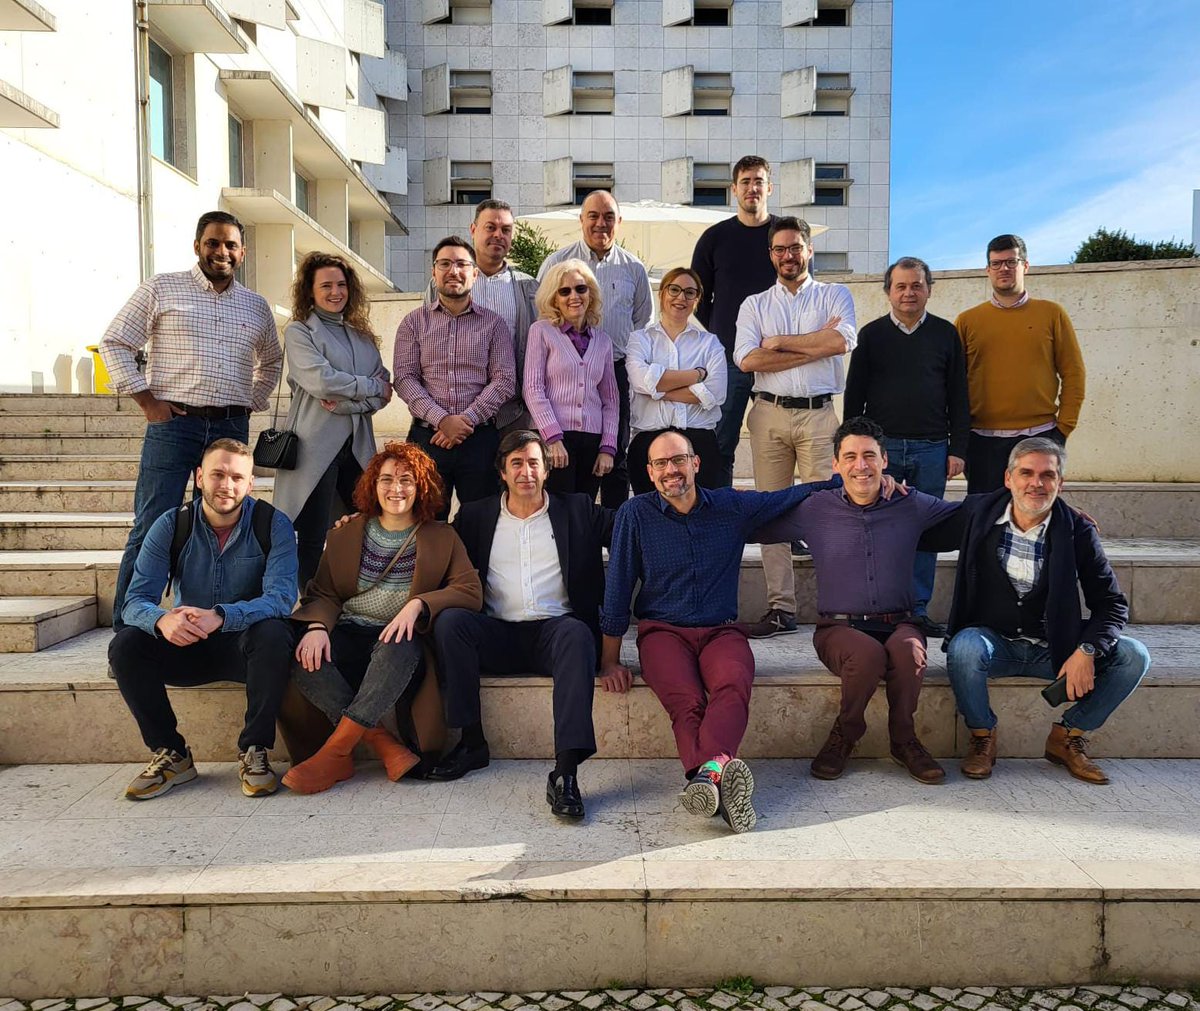 #ResettingEUproject Second General Assembly in Lisbon! The project aims to relaunch European smart and sustainable tourism models through digitalization and innnovative technologies #COSME_EU 
@Resetting18